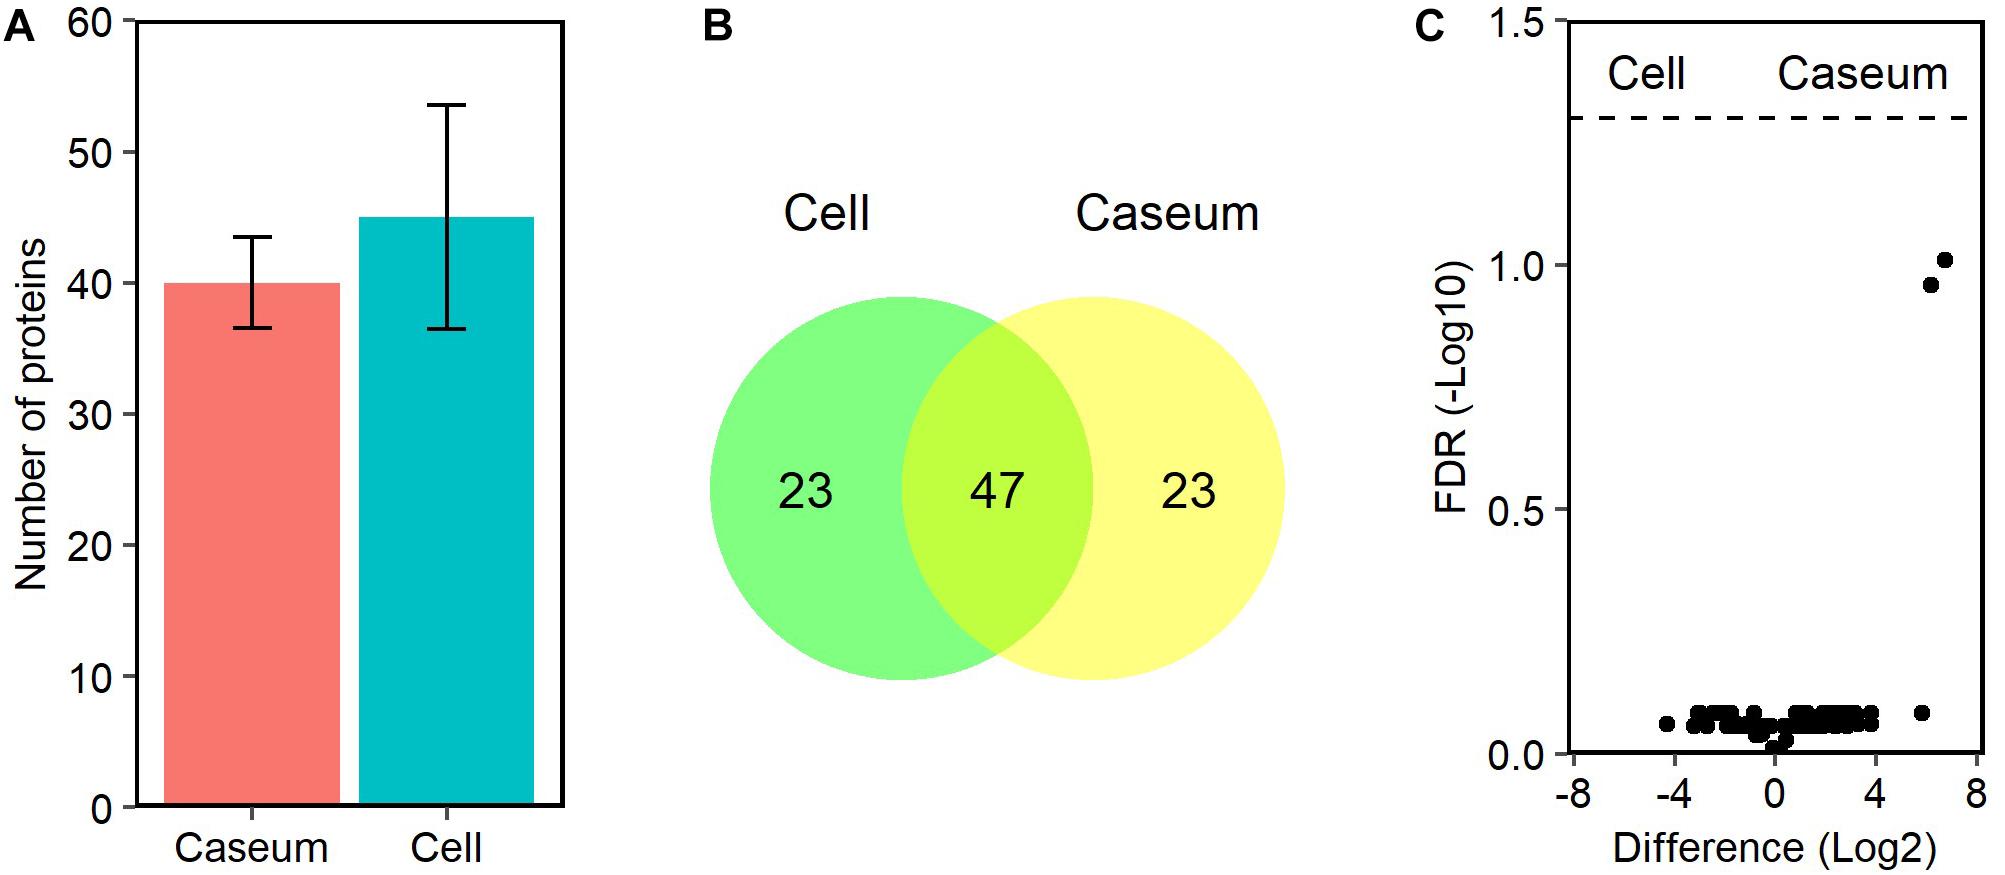 Caseum development is the process of lipid enrichment with necrosis